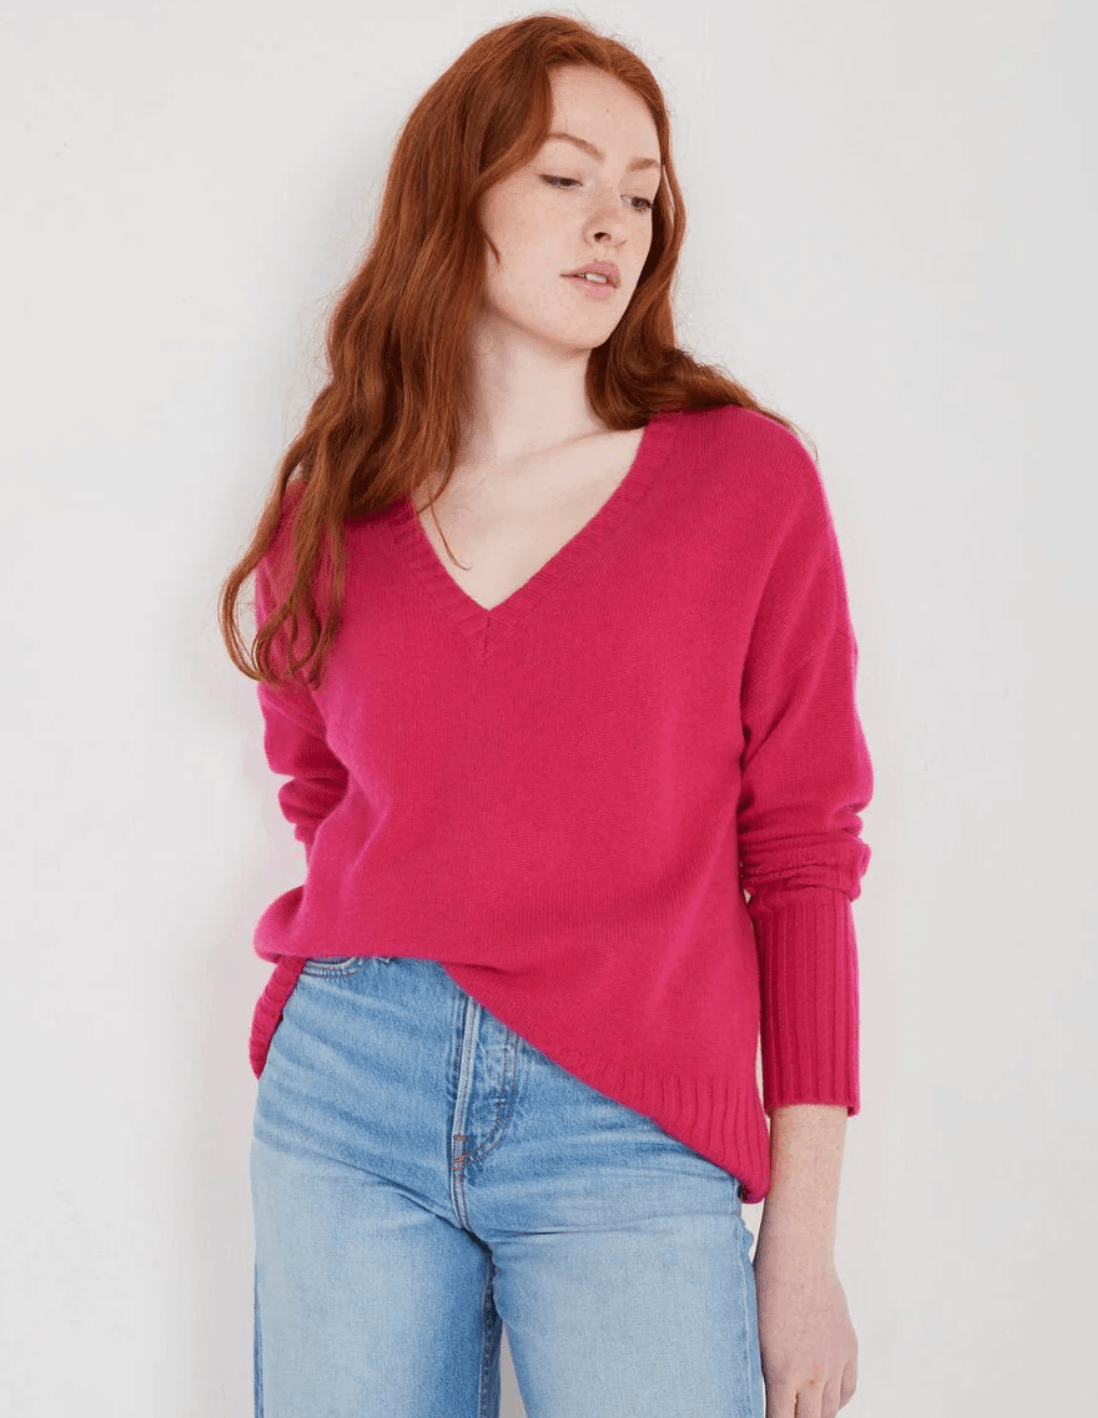 Ella Cashmere V-Neck Sweater in Winter Pink by Not Monday - Haven